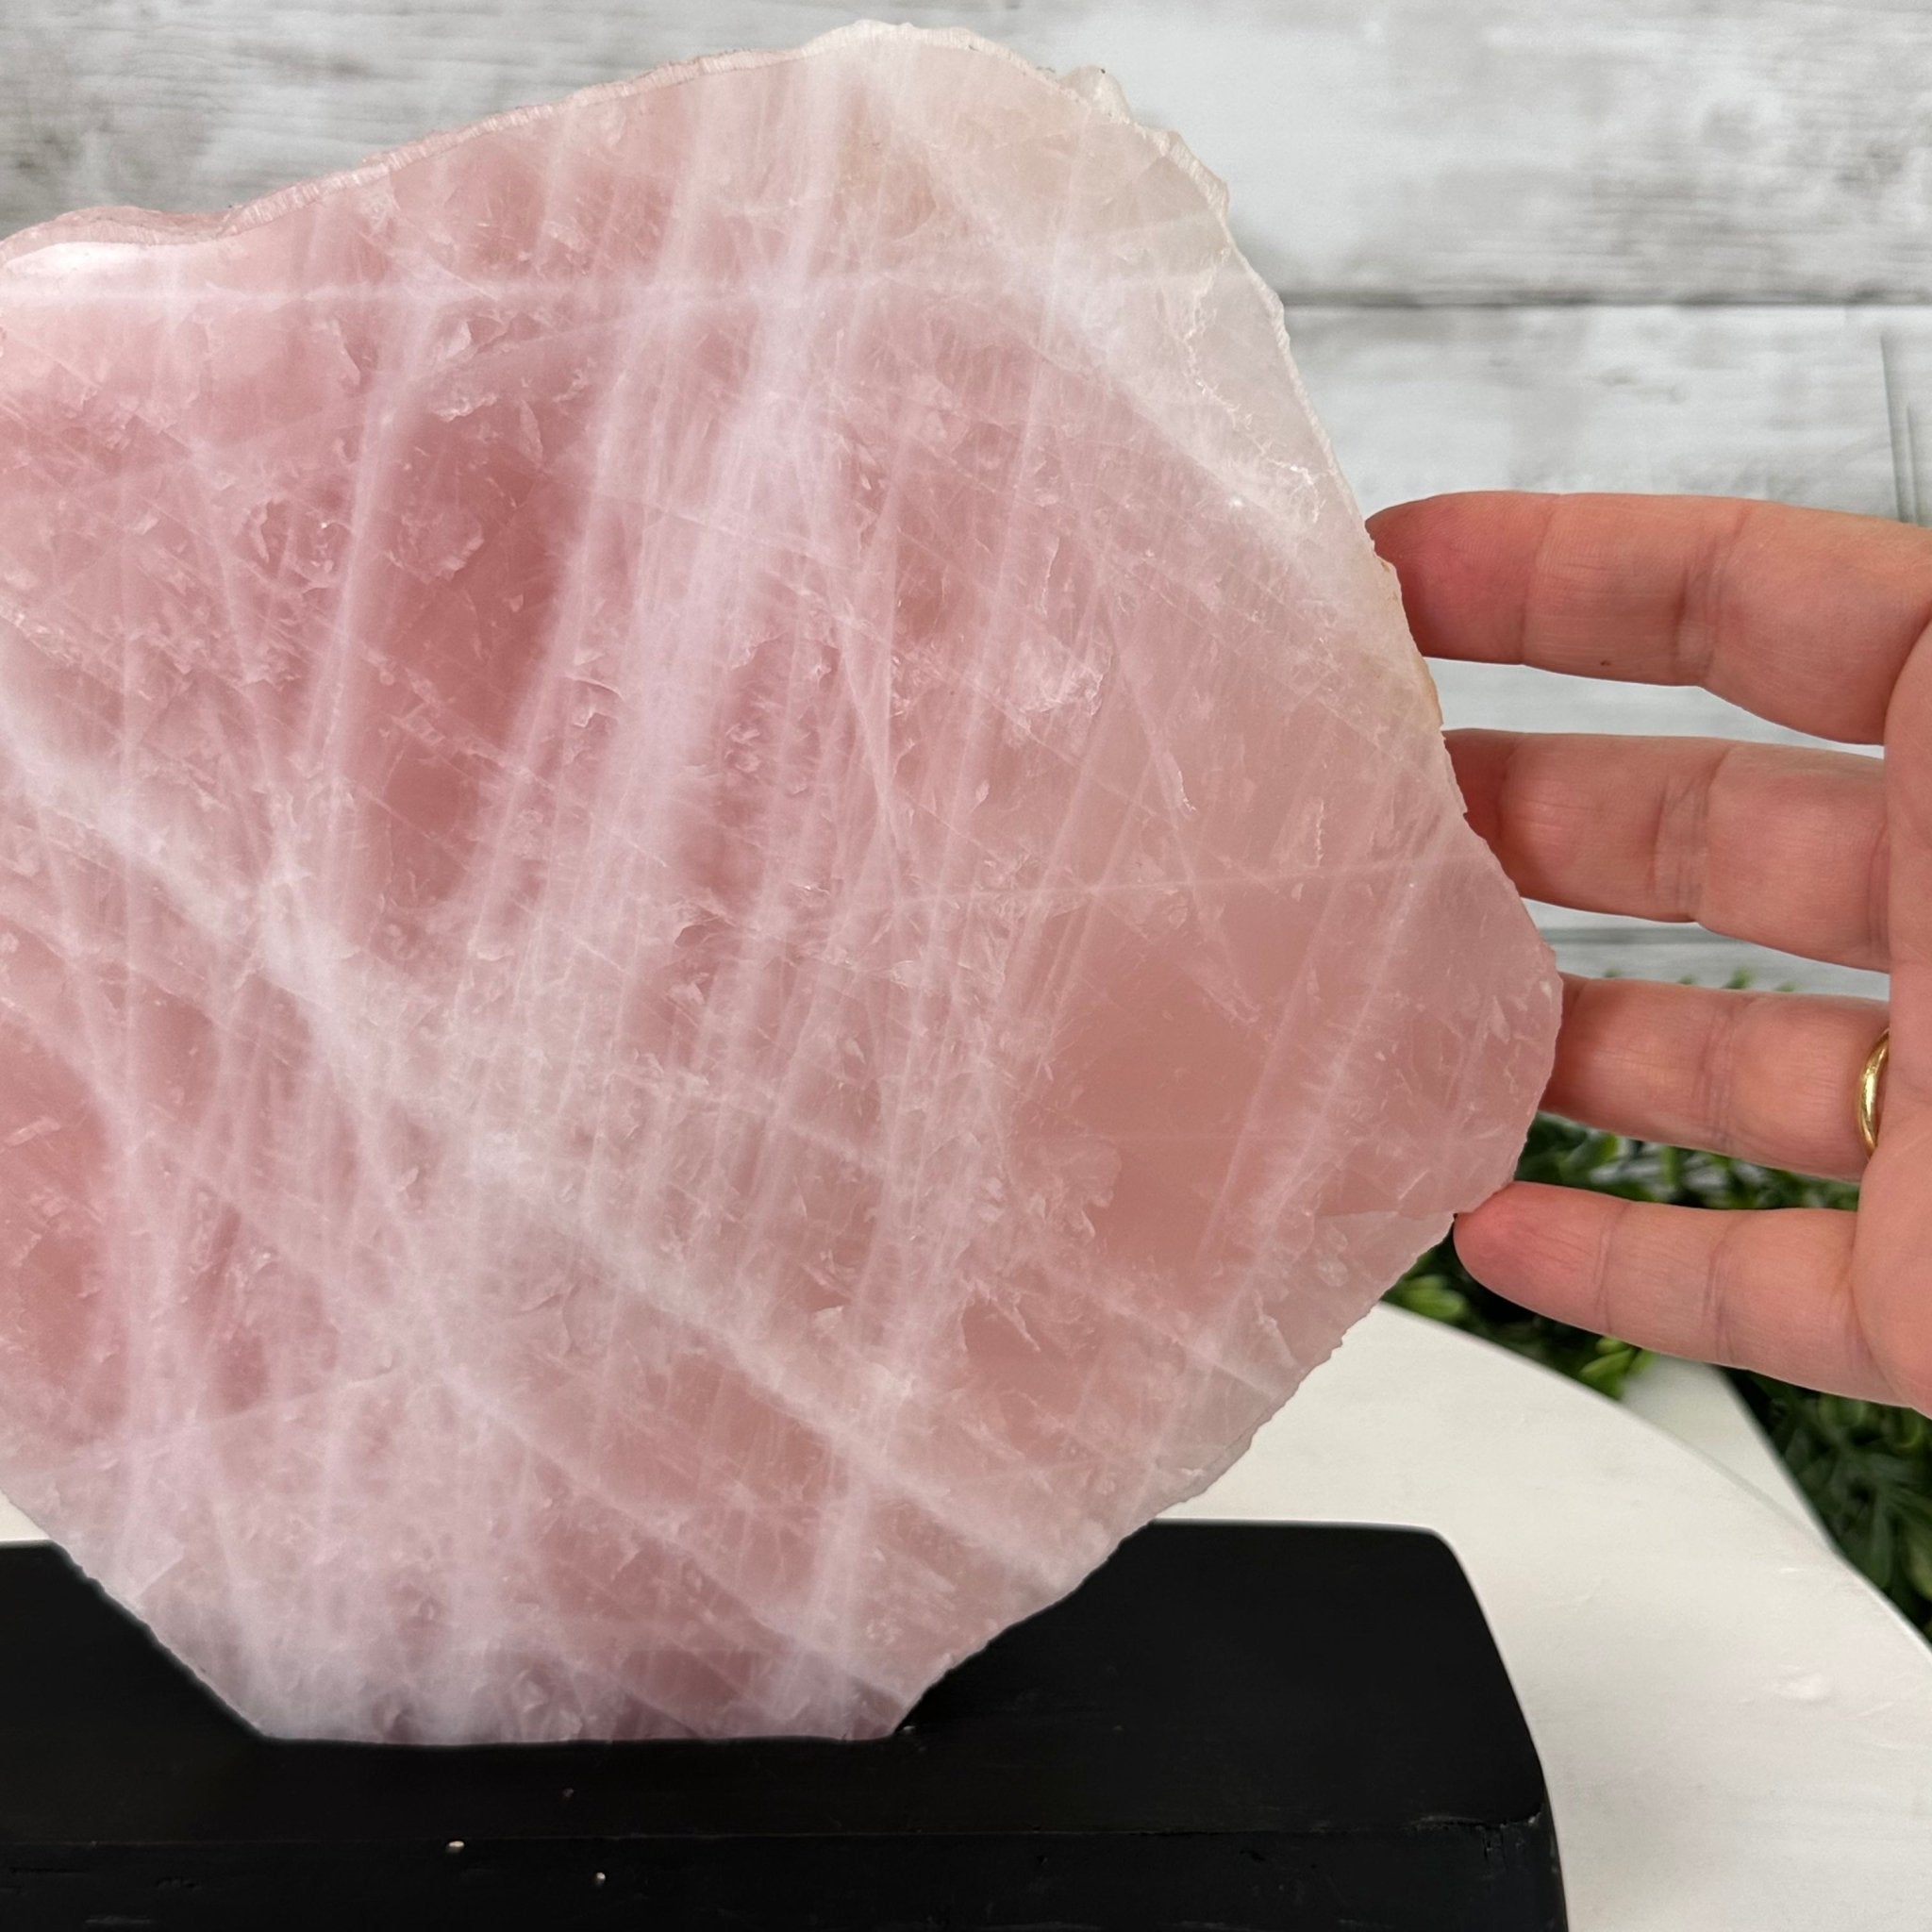 Rose Quartz Polished Slice with Rough Edges on a Wood Base Model 9" Tall Model #6100RQ-046 by Brazil Gems - Brazil GemsBrazil GemsRose Quartz Polished Slice with Rough Edges on a Wood Base Model 9" Tall Model #6100RQ-046 by Brazil GemsSlices on Wood Bases6100RQ-046